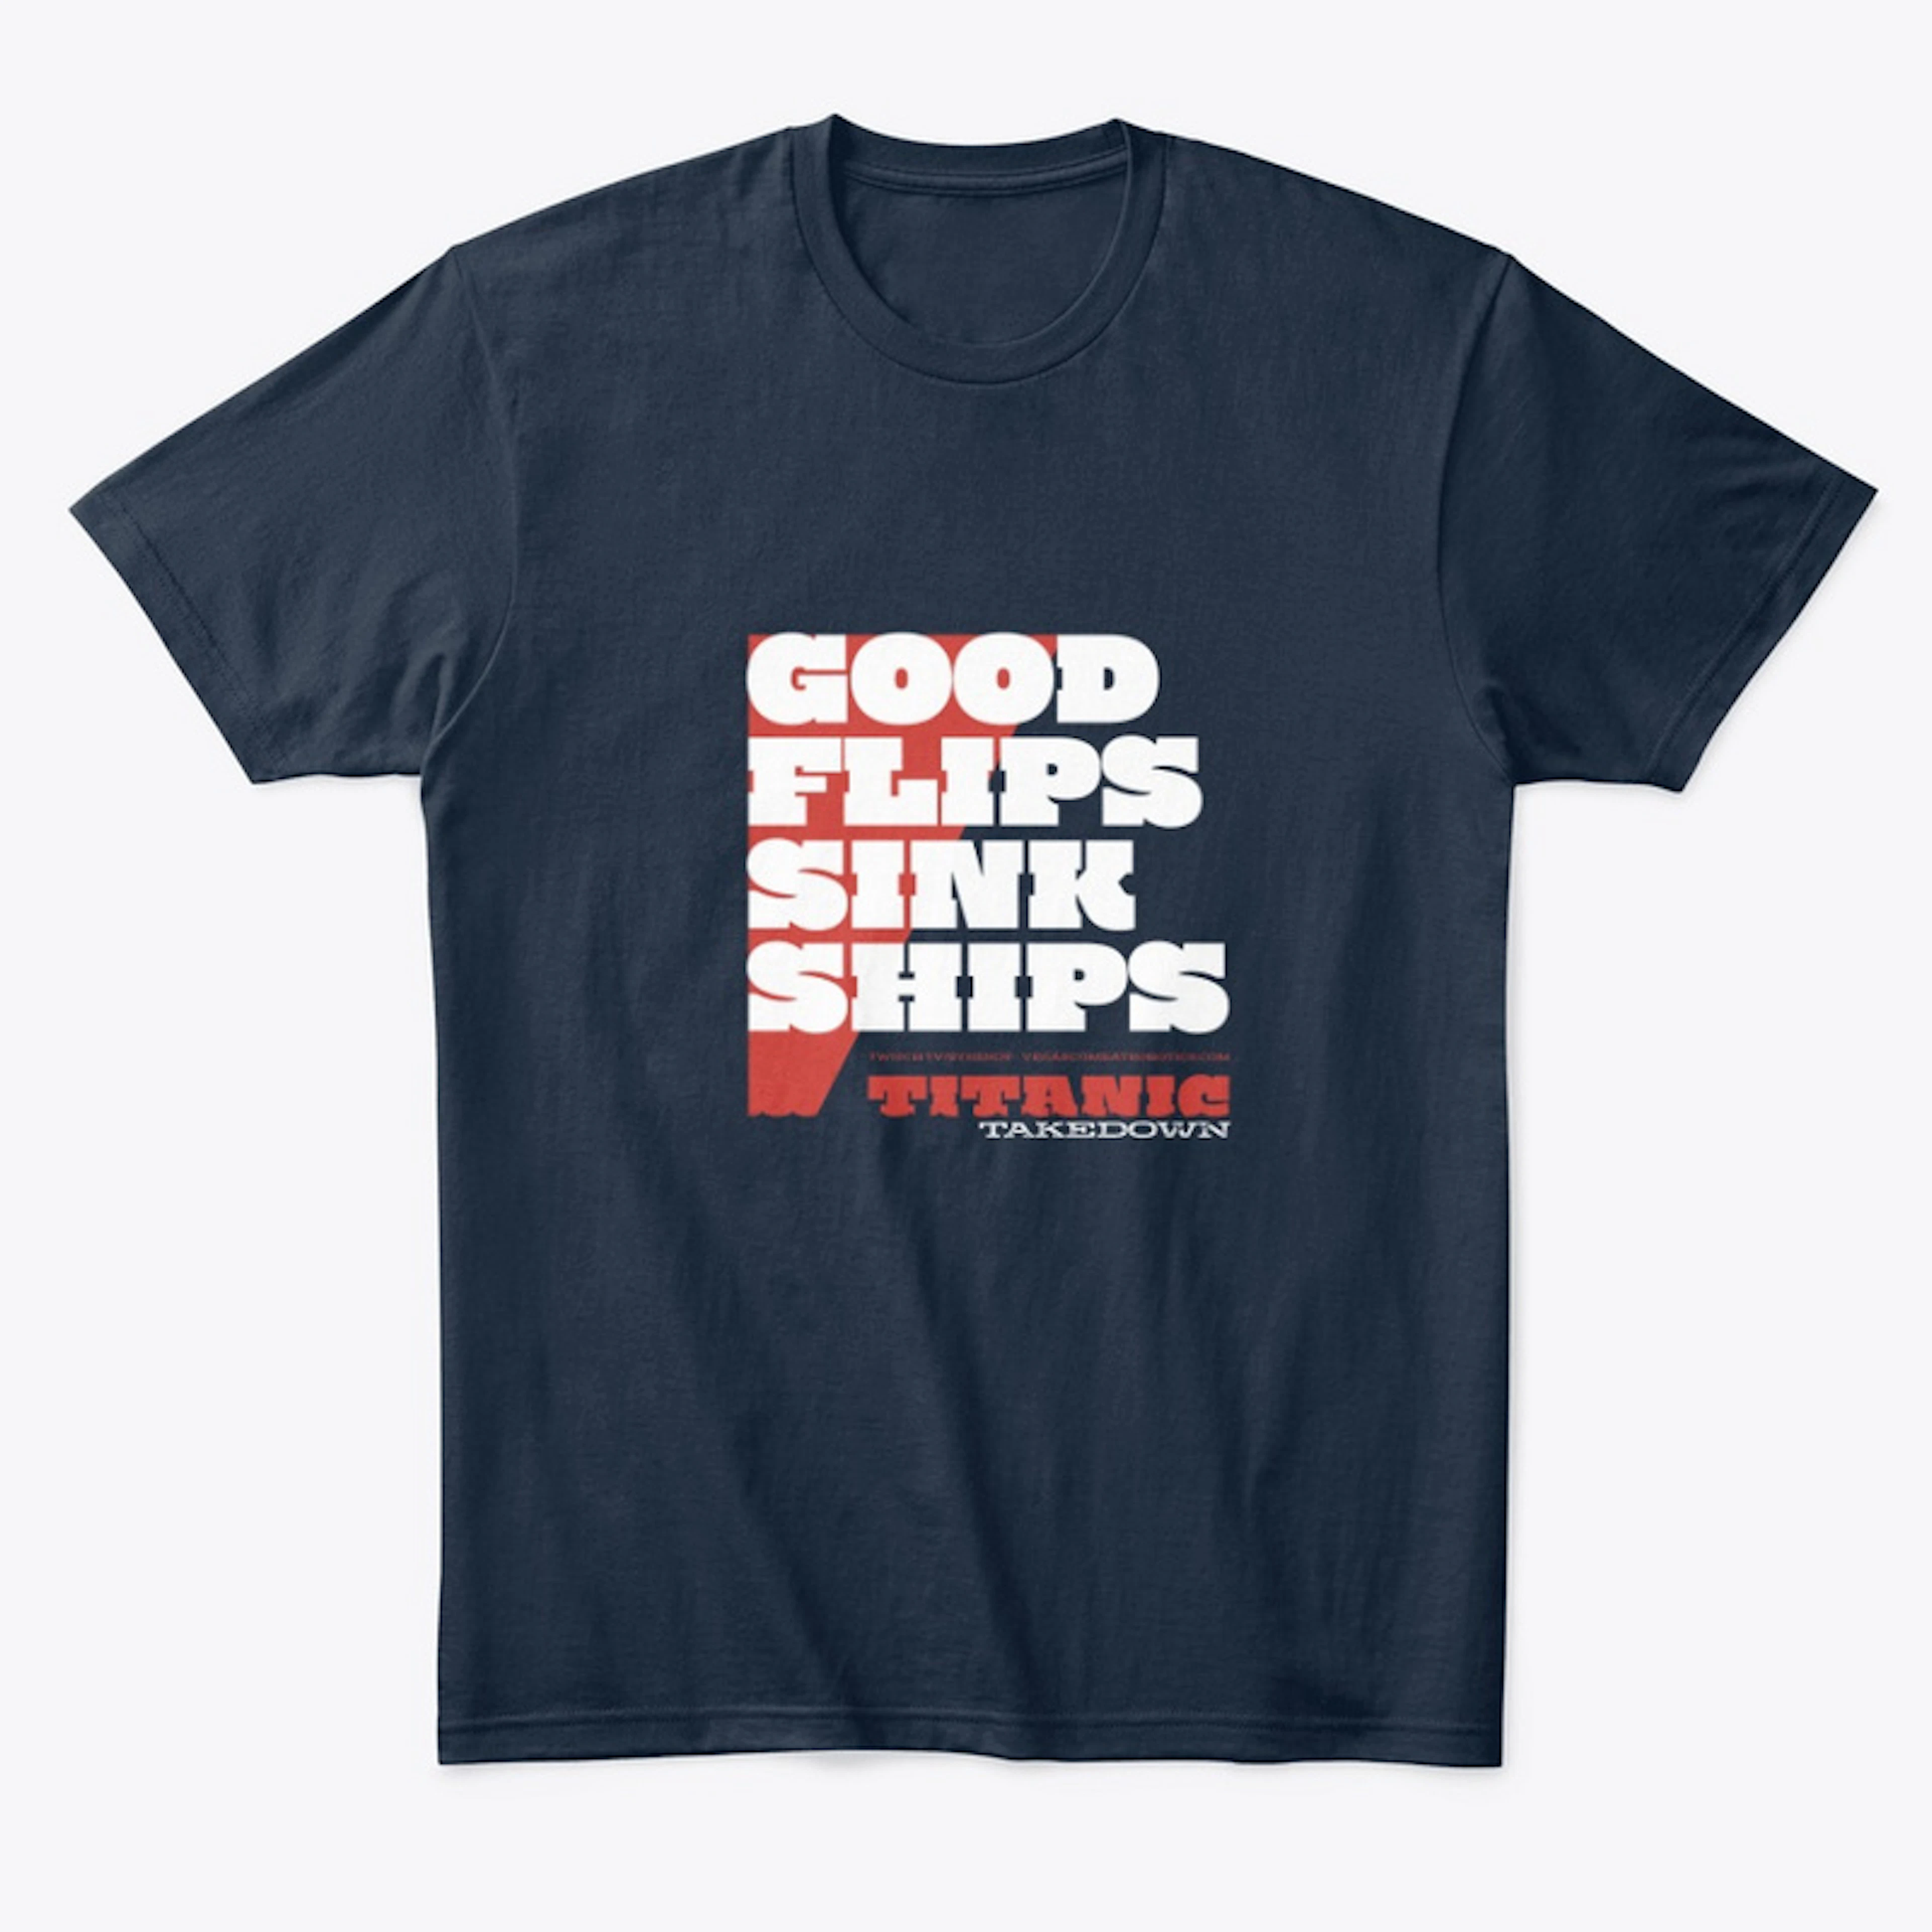 SUBS ONLY Good Flips Sink Ships! +BENCHY